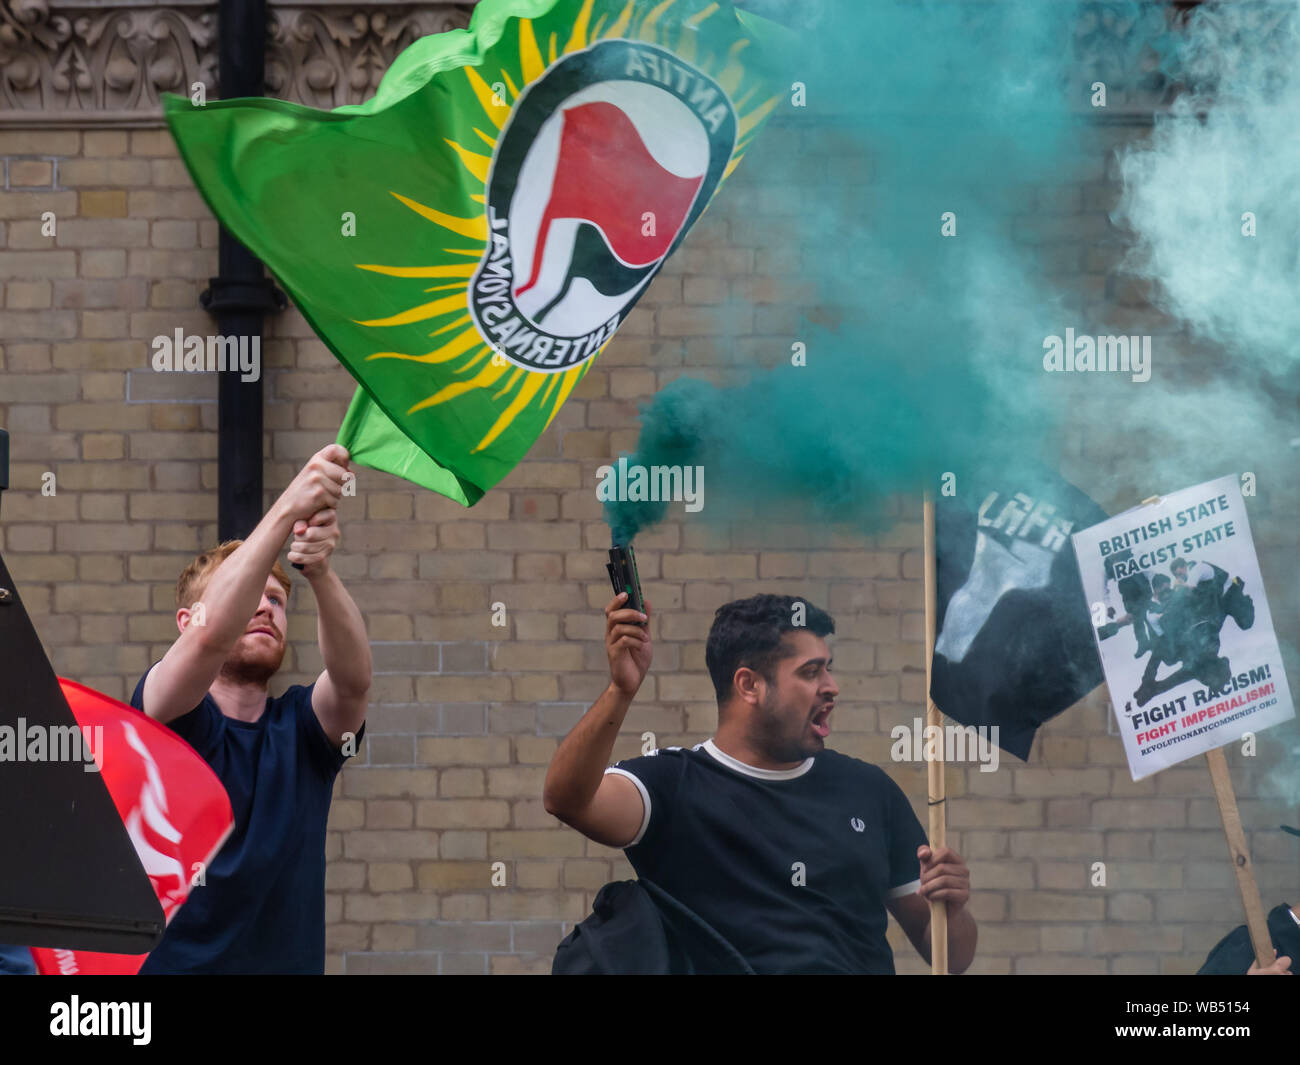 London, UK. 24th August 2019. Anti-fascists hold flags and flares as they oppose a protest at the BBC by Tommy Robinson supporters who claim he is in jail for journalism. He was sentenced to 9 months for 3 offences outside Leeds Crown Court which could have led to the collapse of a grooming gang trial, and has previous convictions for violence, financial and immigration frauds, drug possession and public order offences. Police kept the two groups apart. Robinson supporters were later joined by marchers from Trafalgar Square, and a larger group from Stand Up to Racism came to join Antifa. Peter Stock Photo